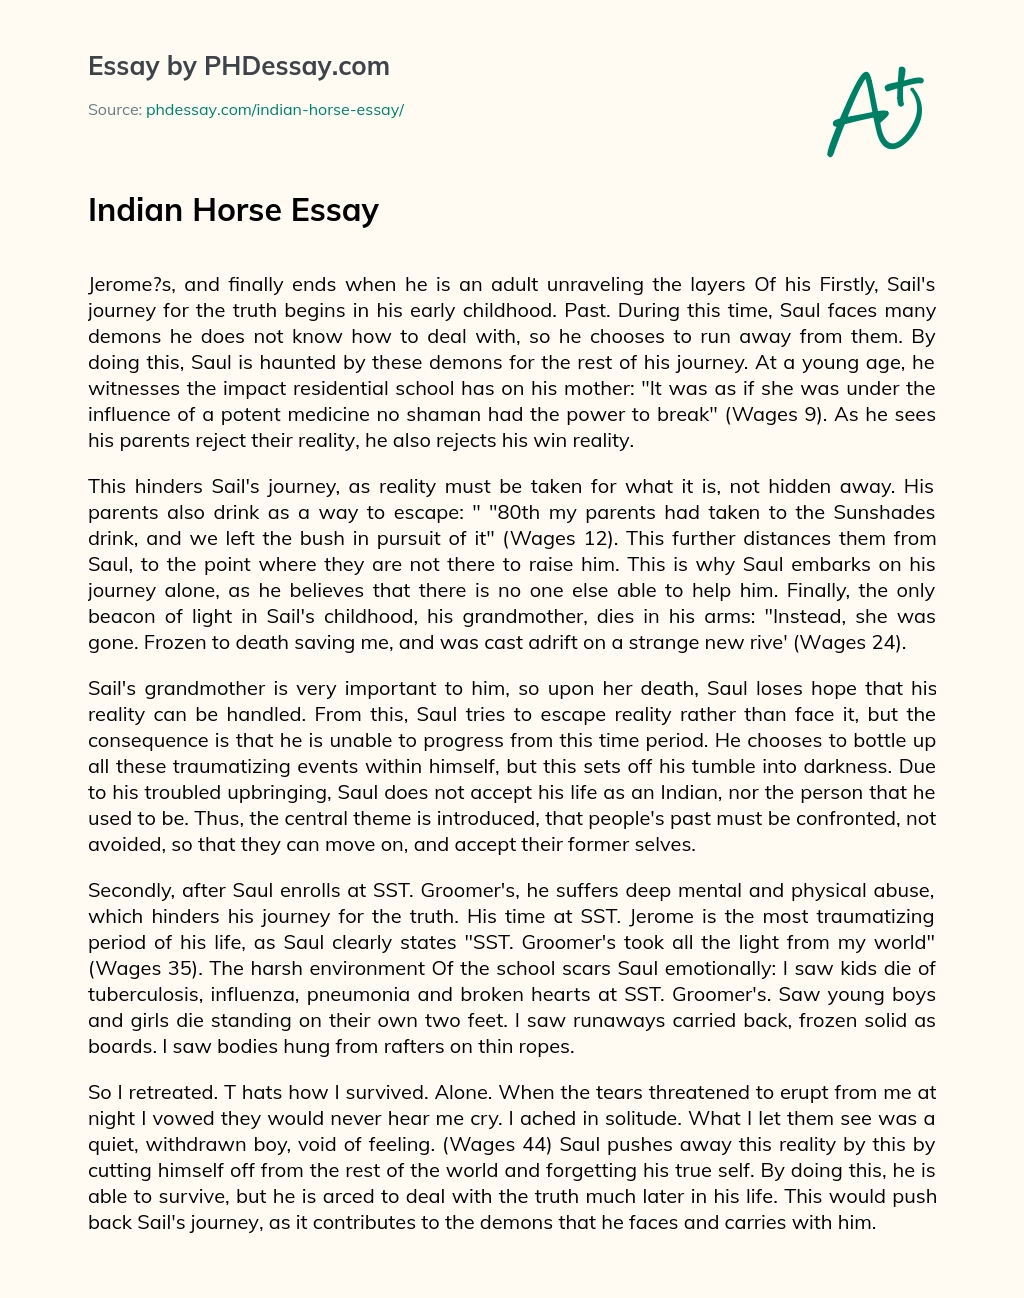 thesis statement about indian horse